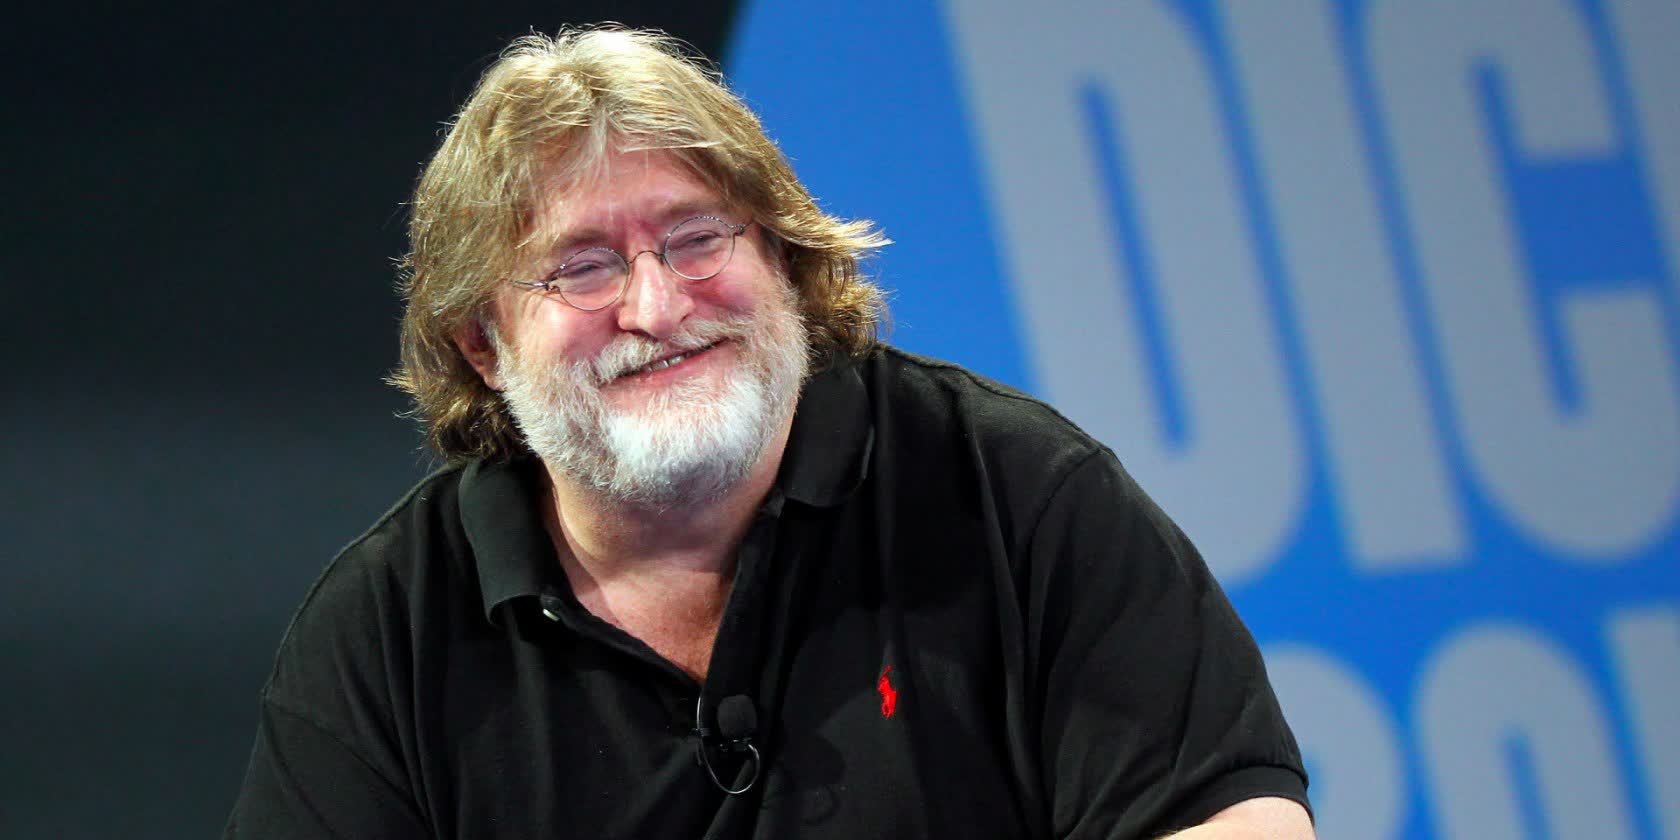 Valve CEO Gabe Newell wants to discuss relocating game developers to New Zealand